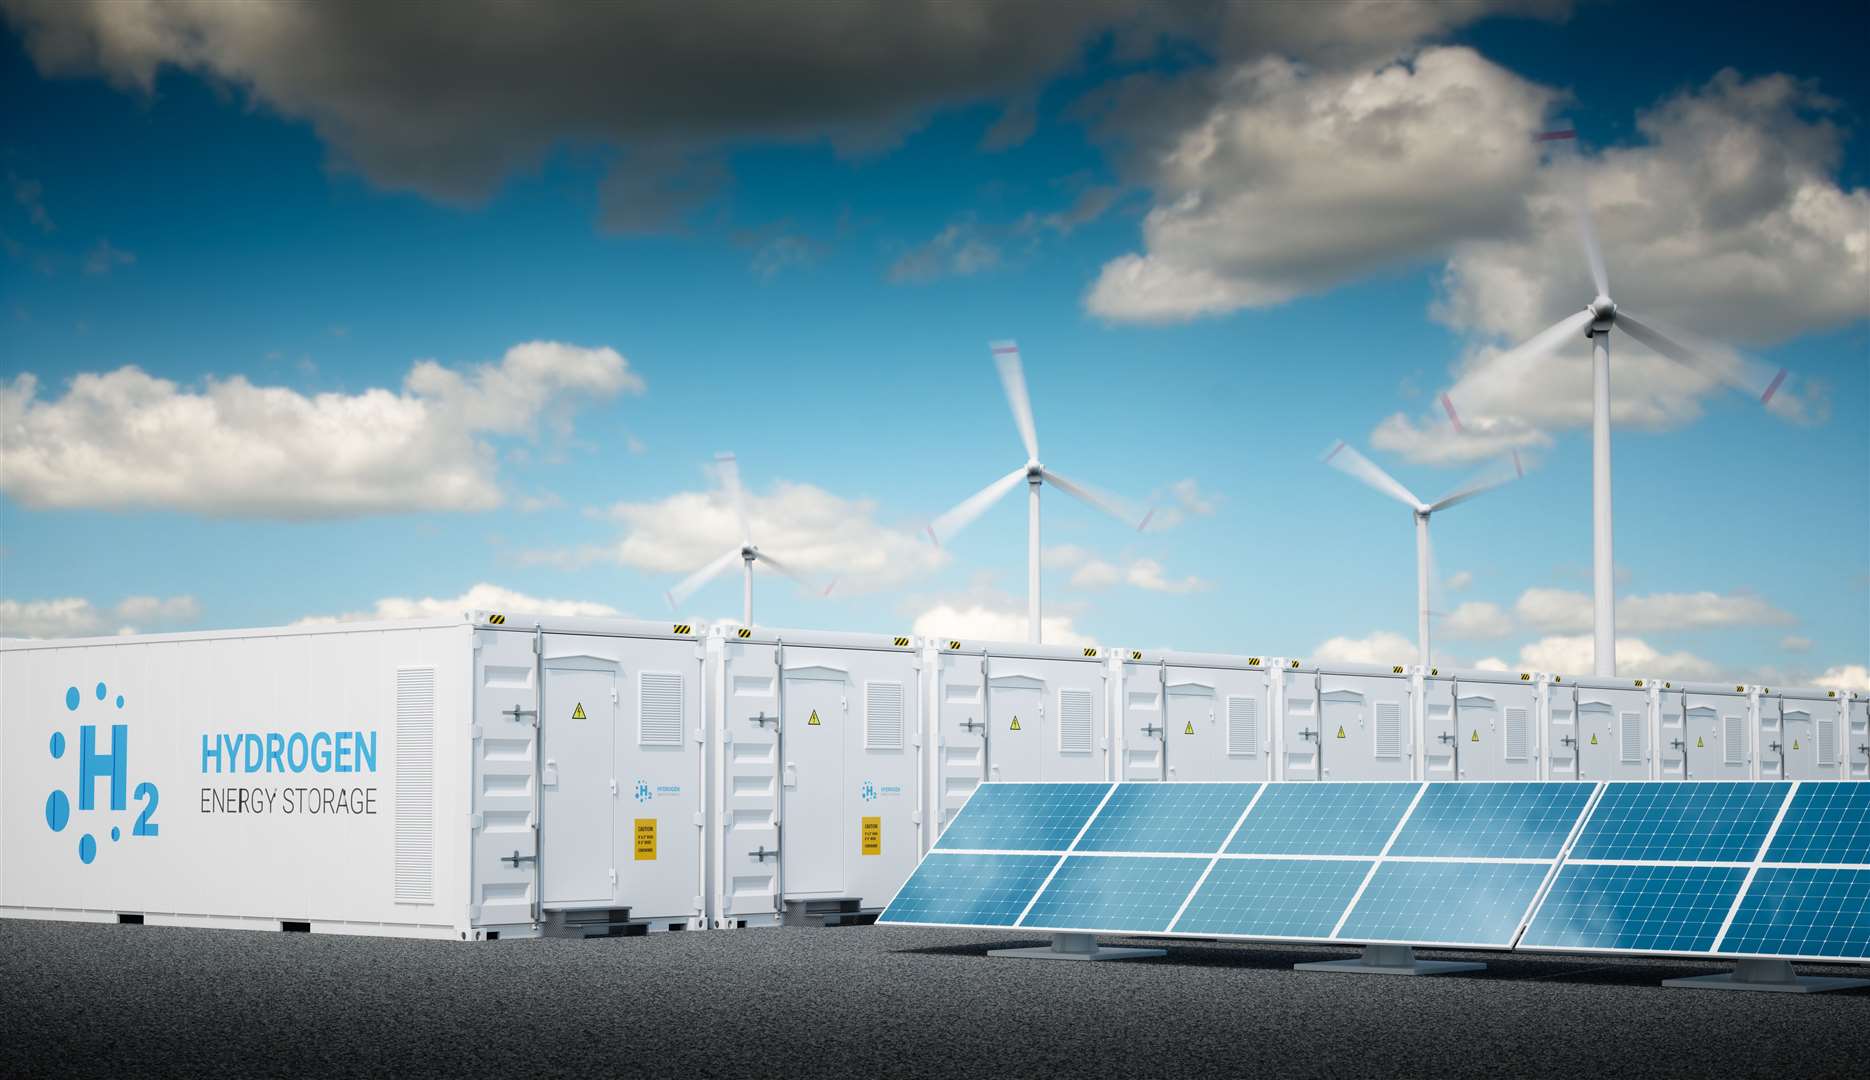 Hydrogen energy storage could offer green solutions, especially for remote and rural communities.